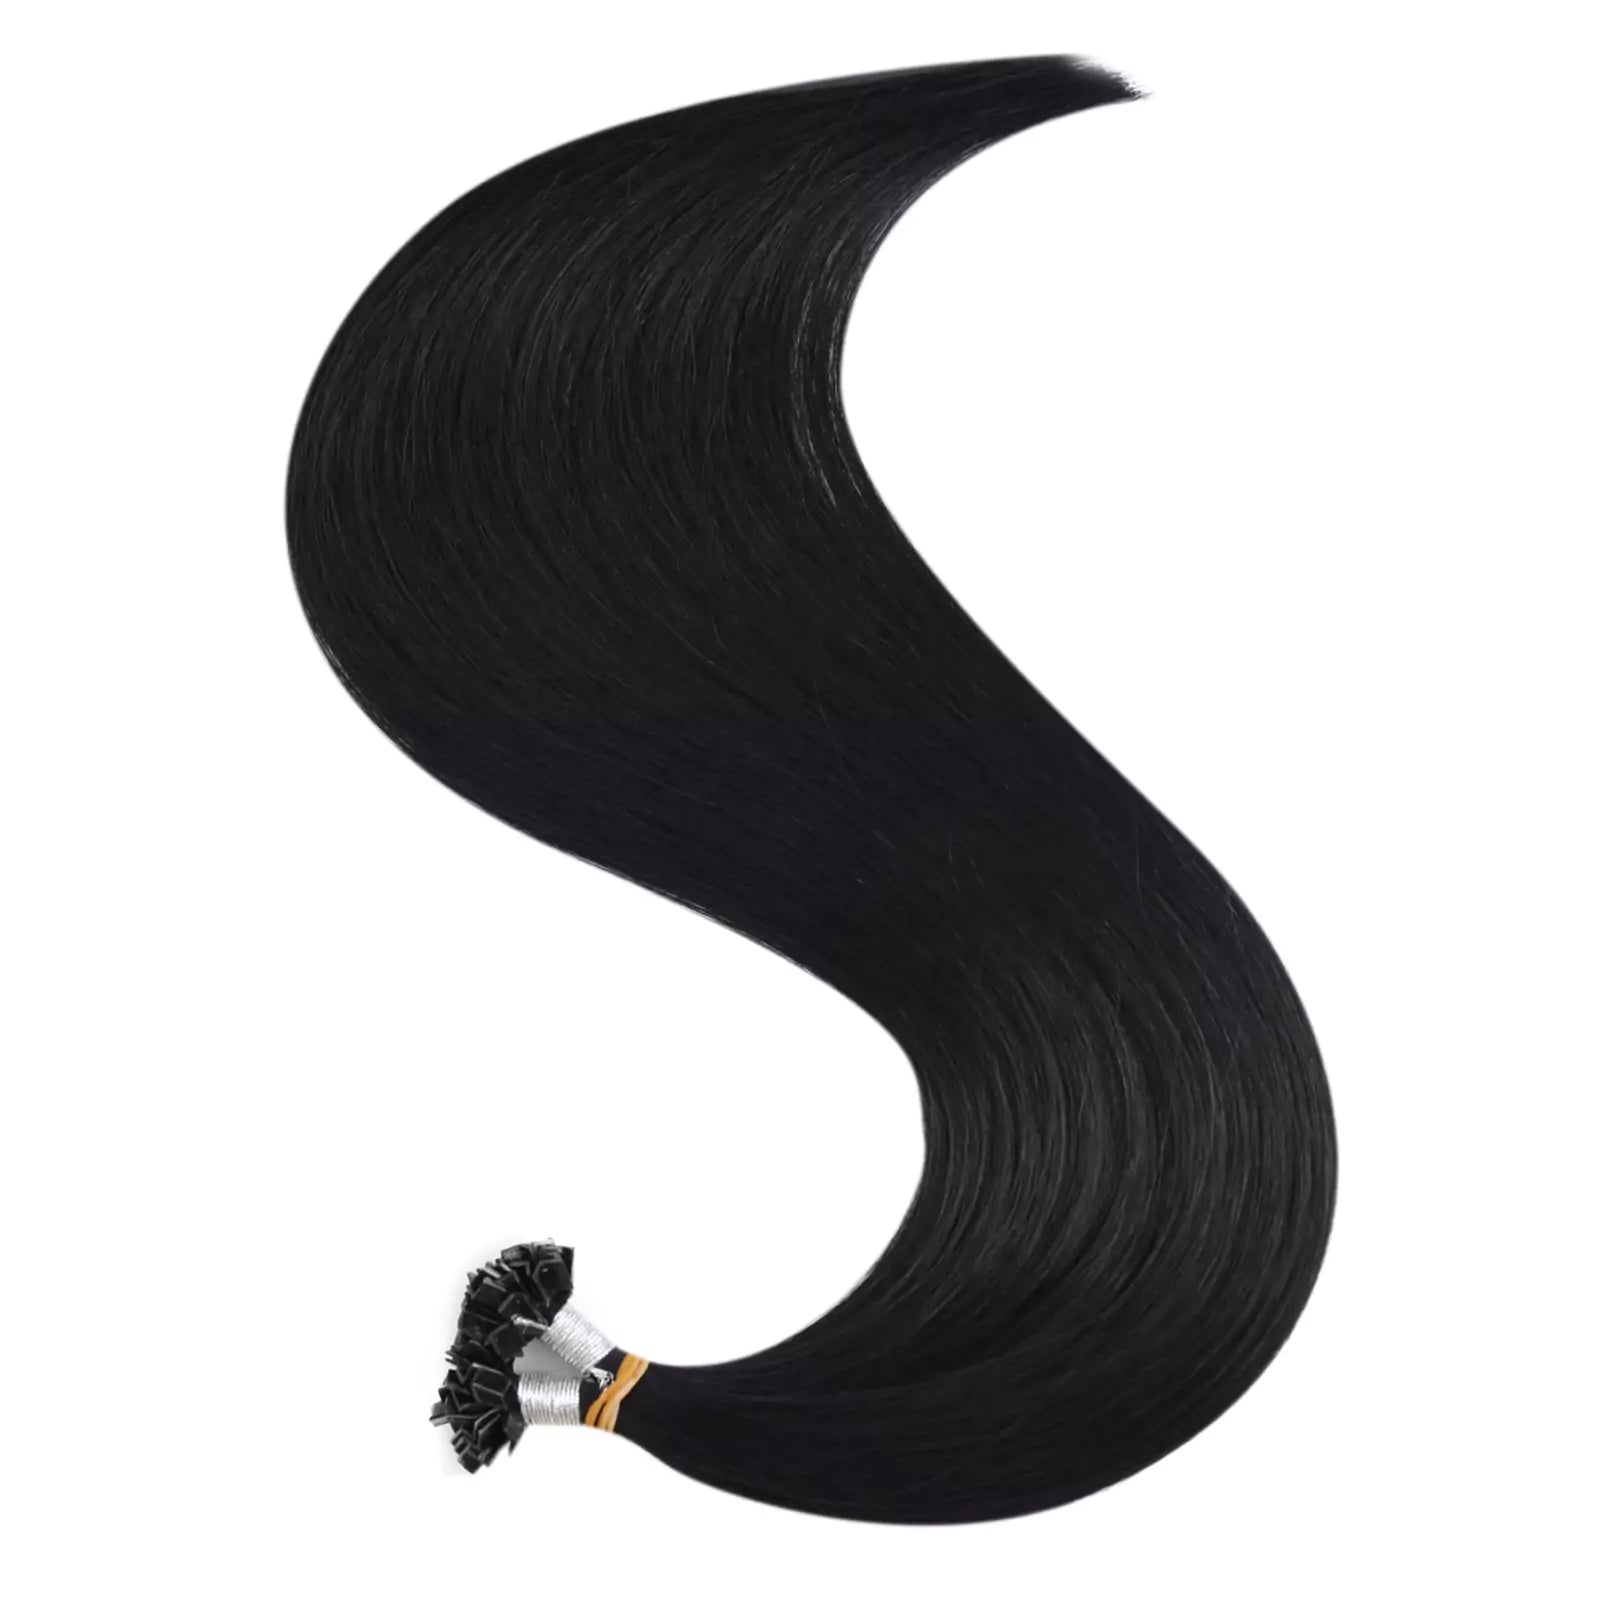 High Quality Ktip Extensions 100% Human Hair Jet Black Color